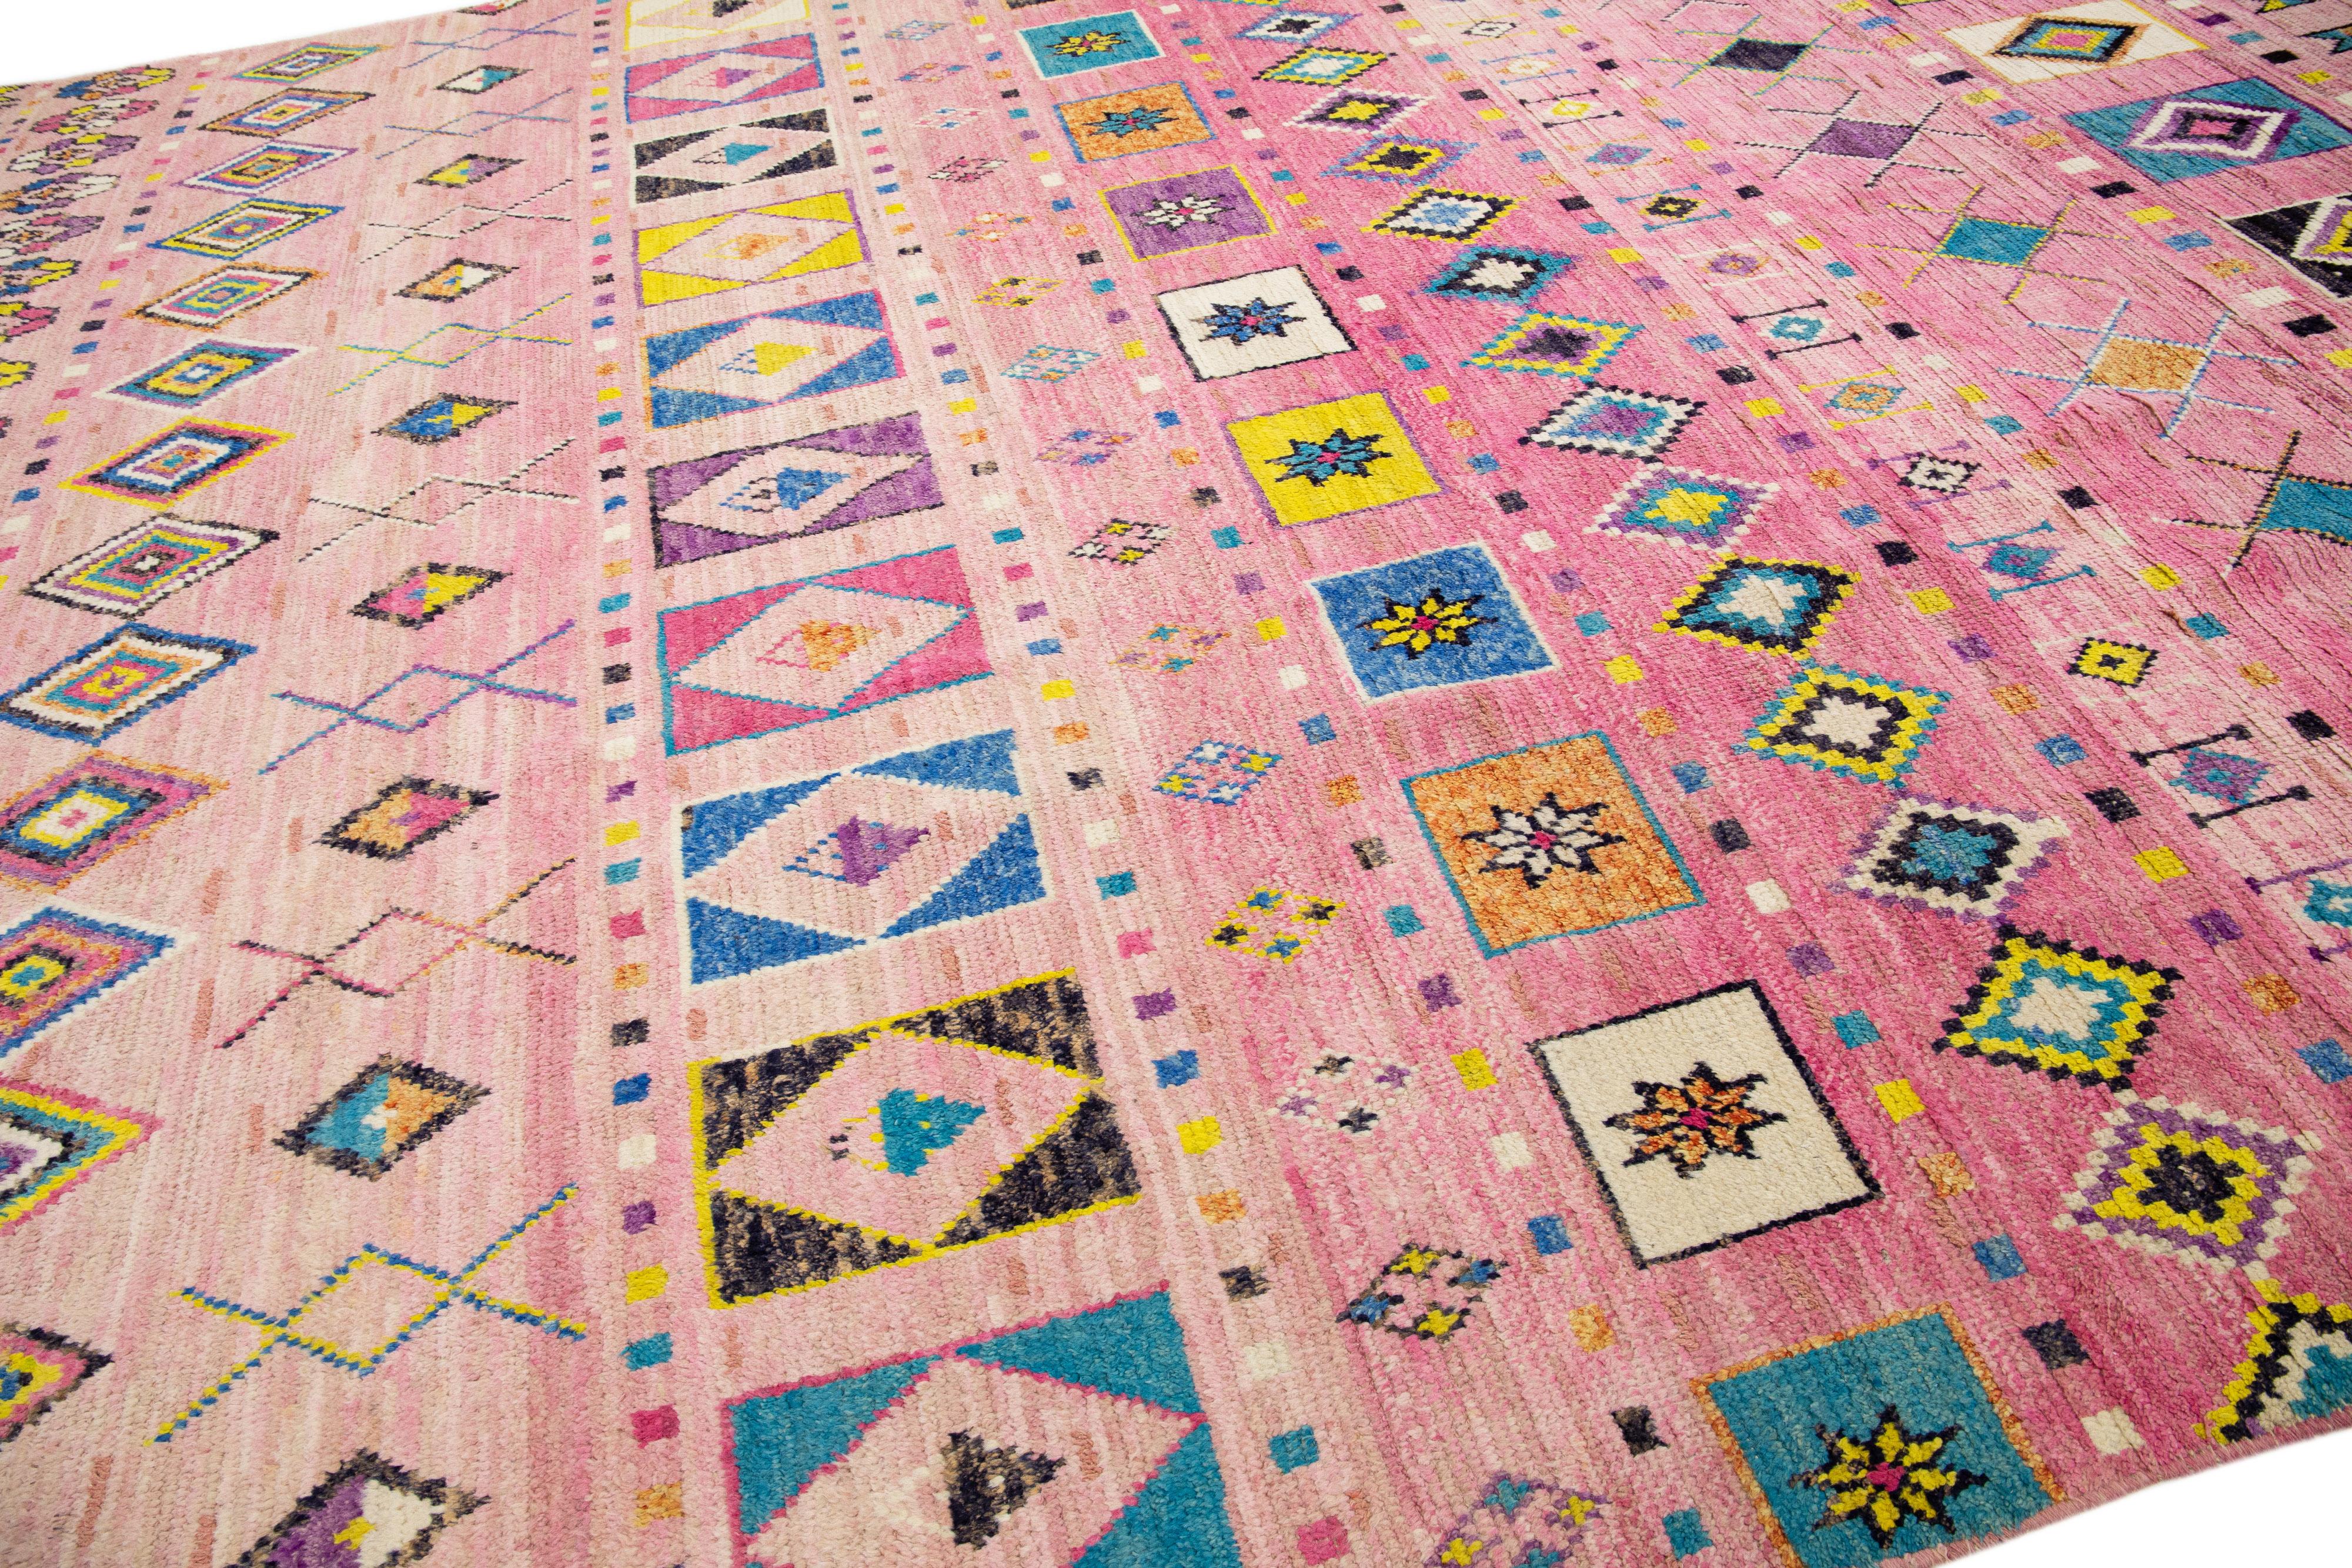 Beautiful moroccan berber style hand-knotted wool rug with a pink field. This piece has multicolor accents in an all-over geometric design.

This rug measures: 12' x 15'6